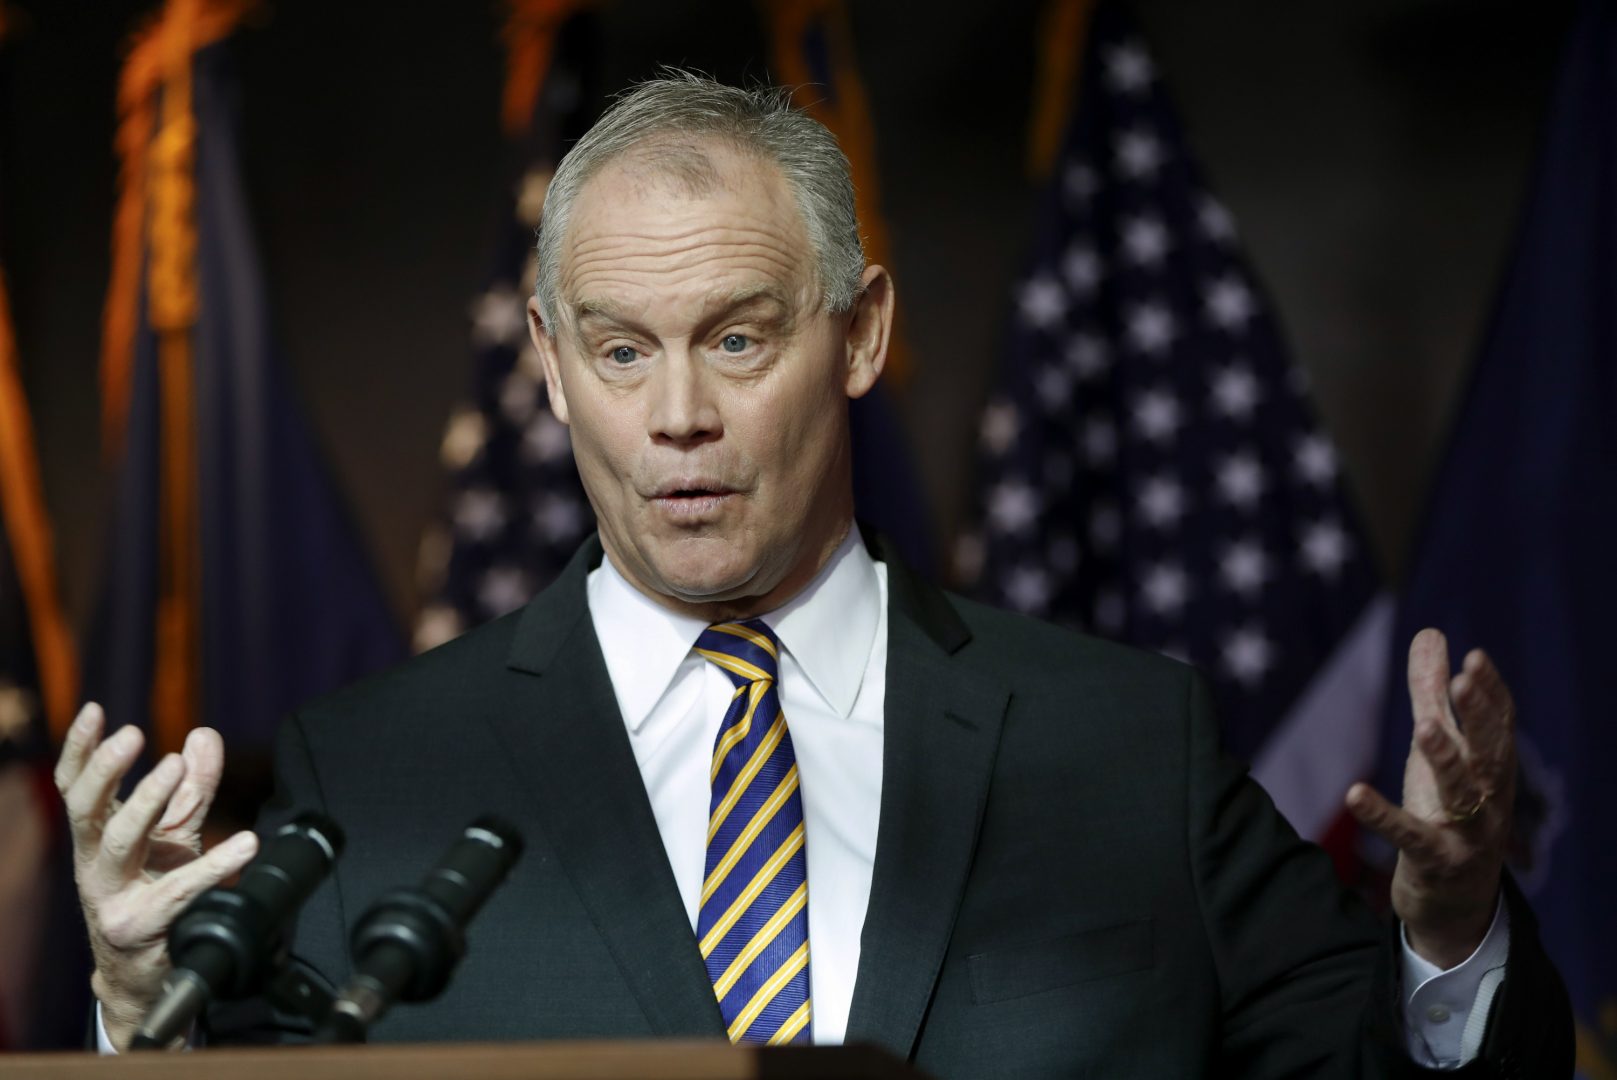 Pennsylvania Speaker of the House Mike Turzai announces at a news conference he will not run for another term as a Pennsylvania representative, Thursday, Jan. 23, 2020, in McCandless.